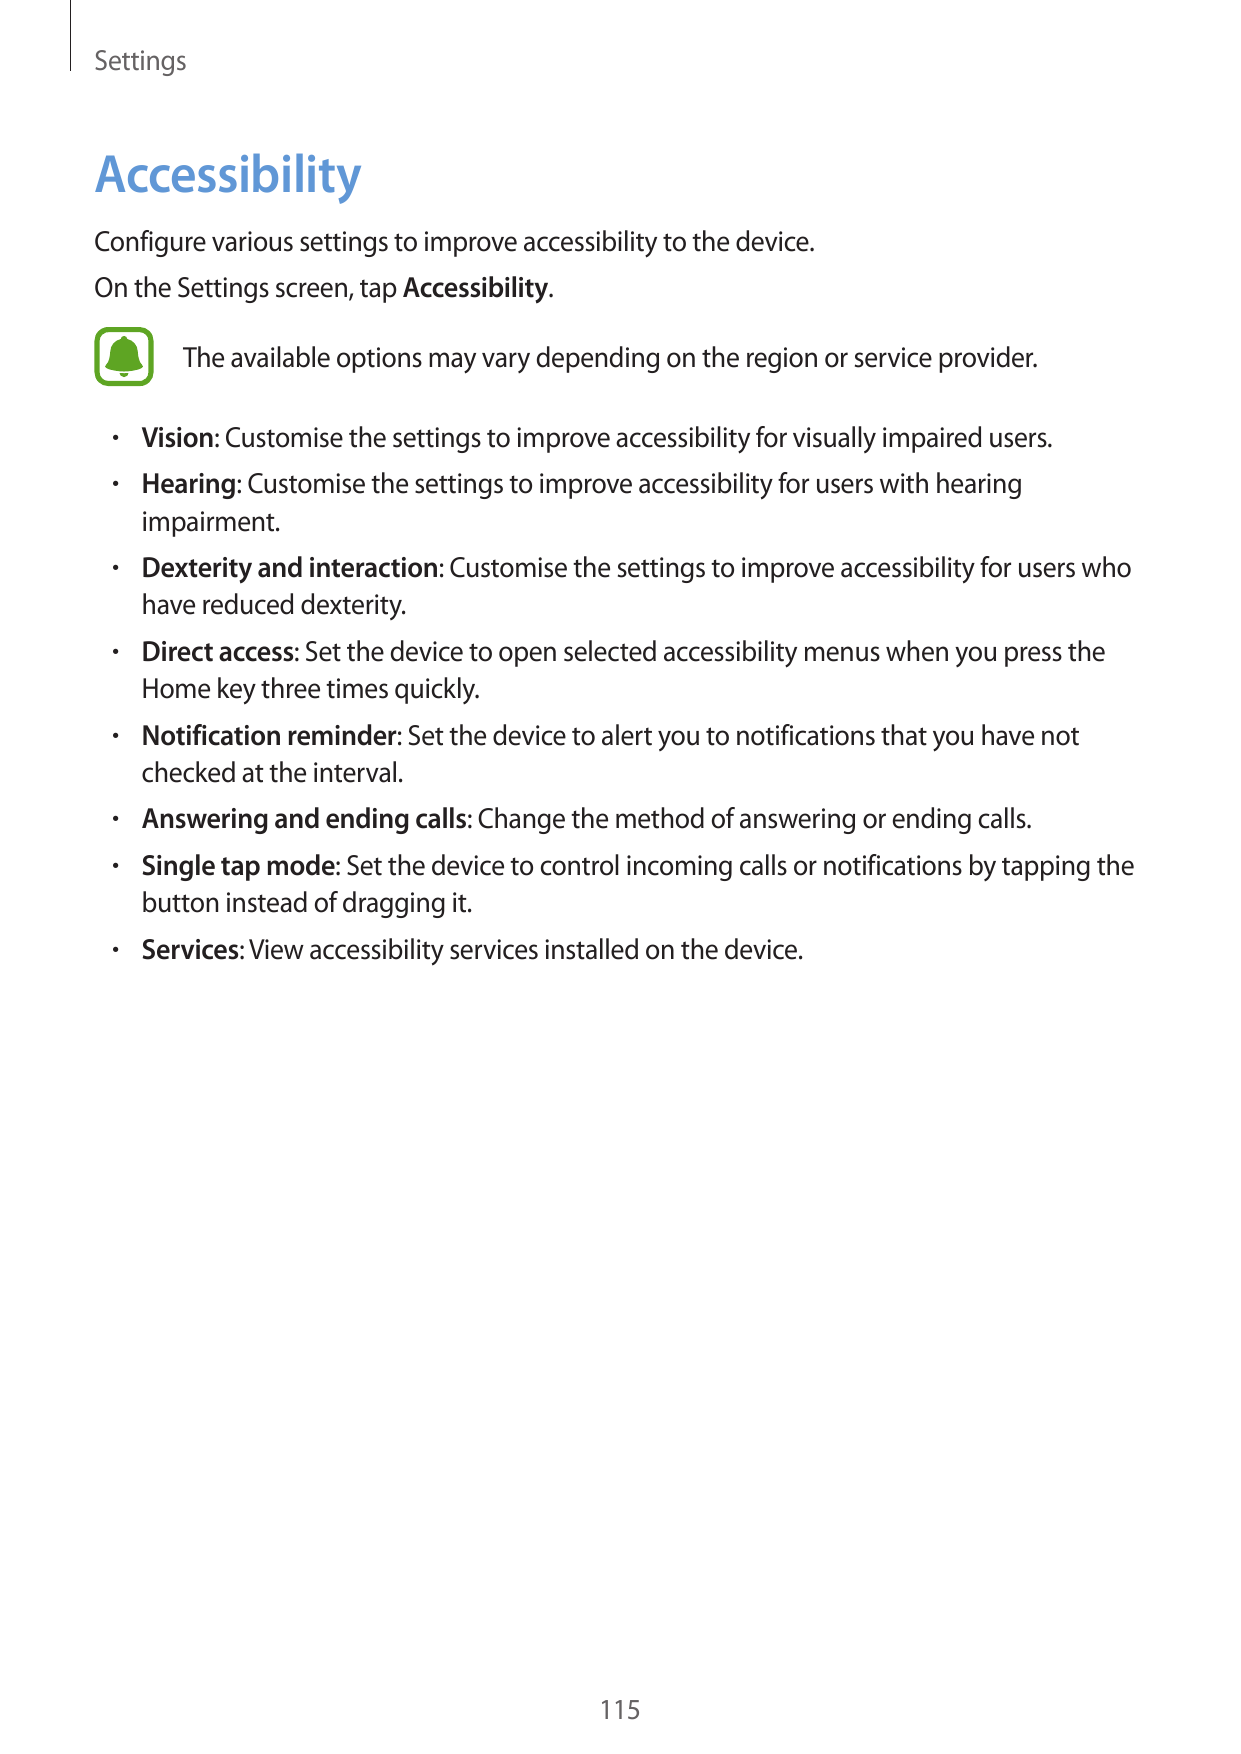 SettingsAccessibilityConfigure various settings to improve accessibility to the device.On the Settings screen, tap Accessibility